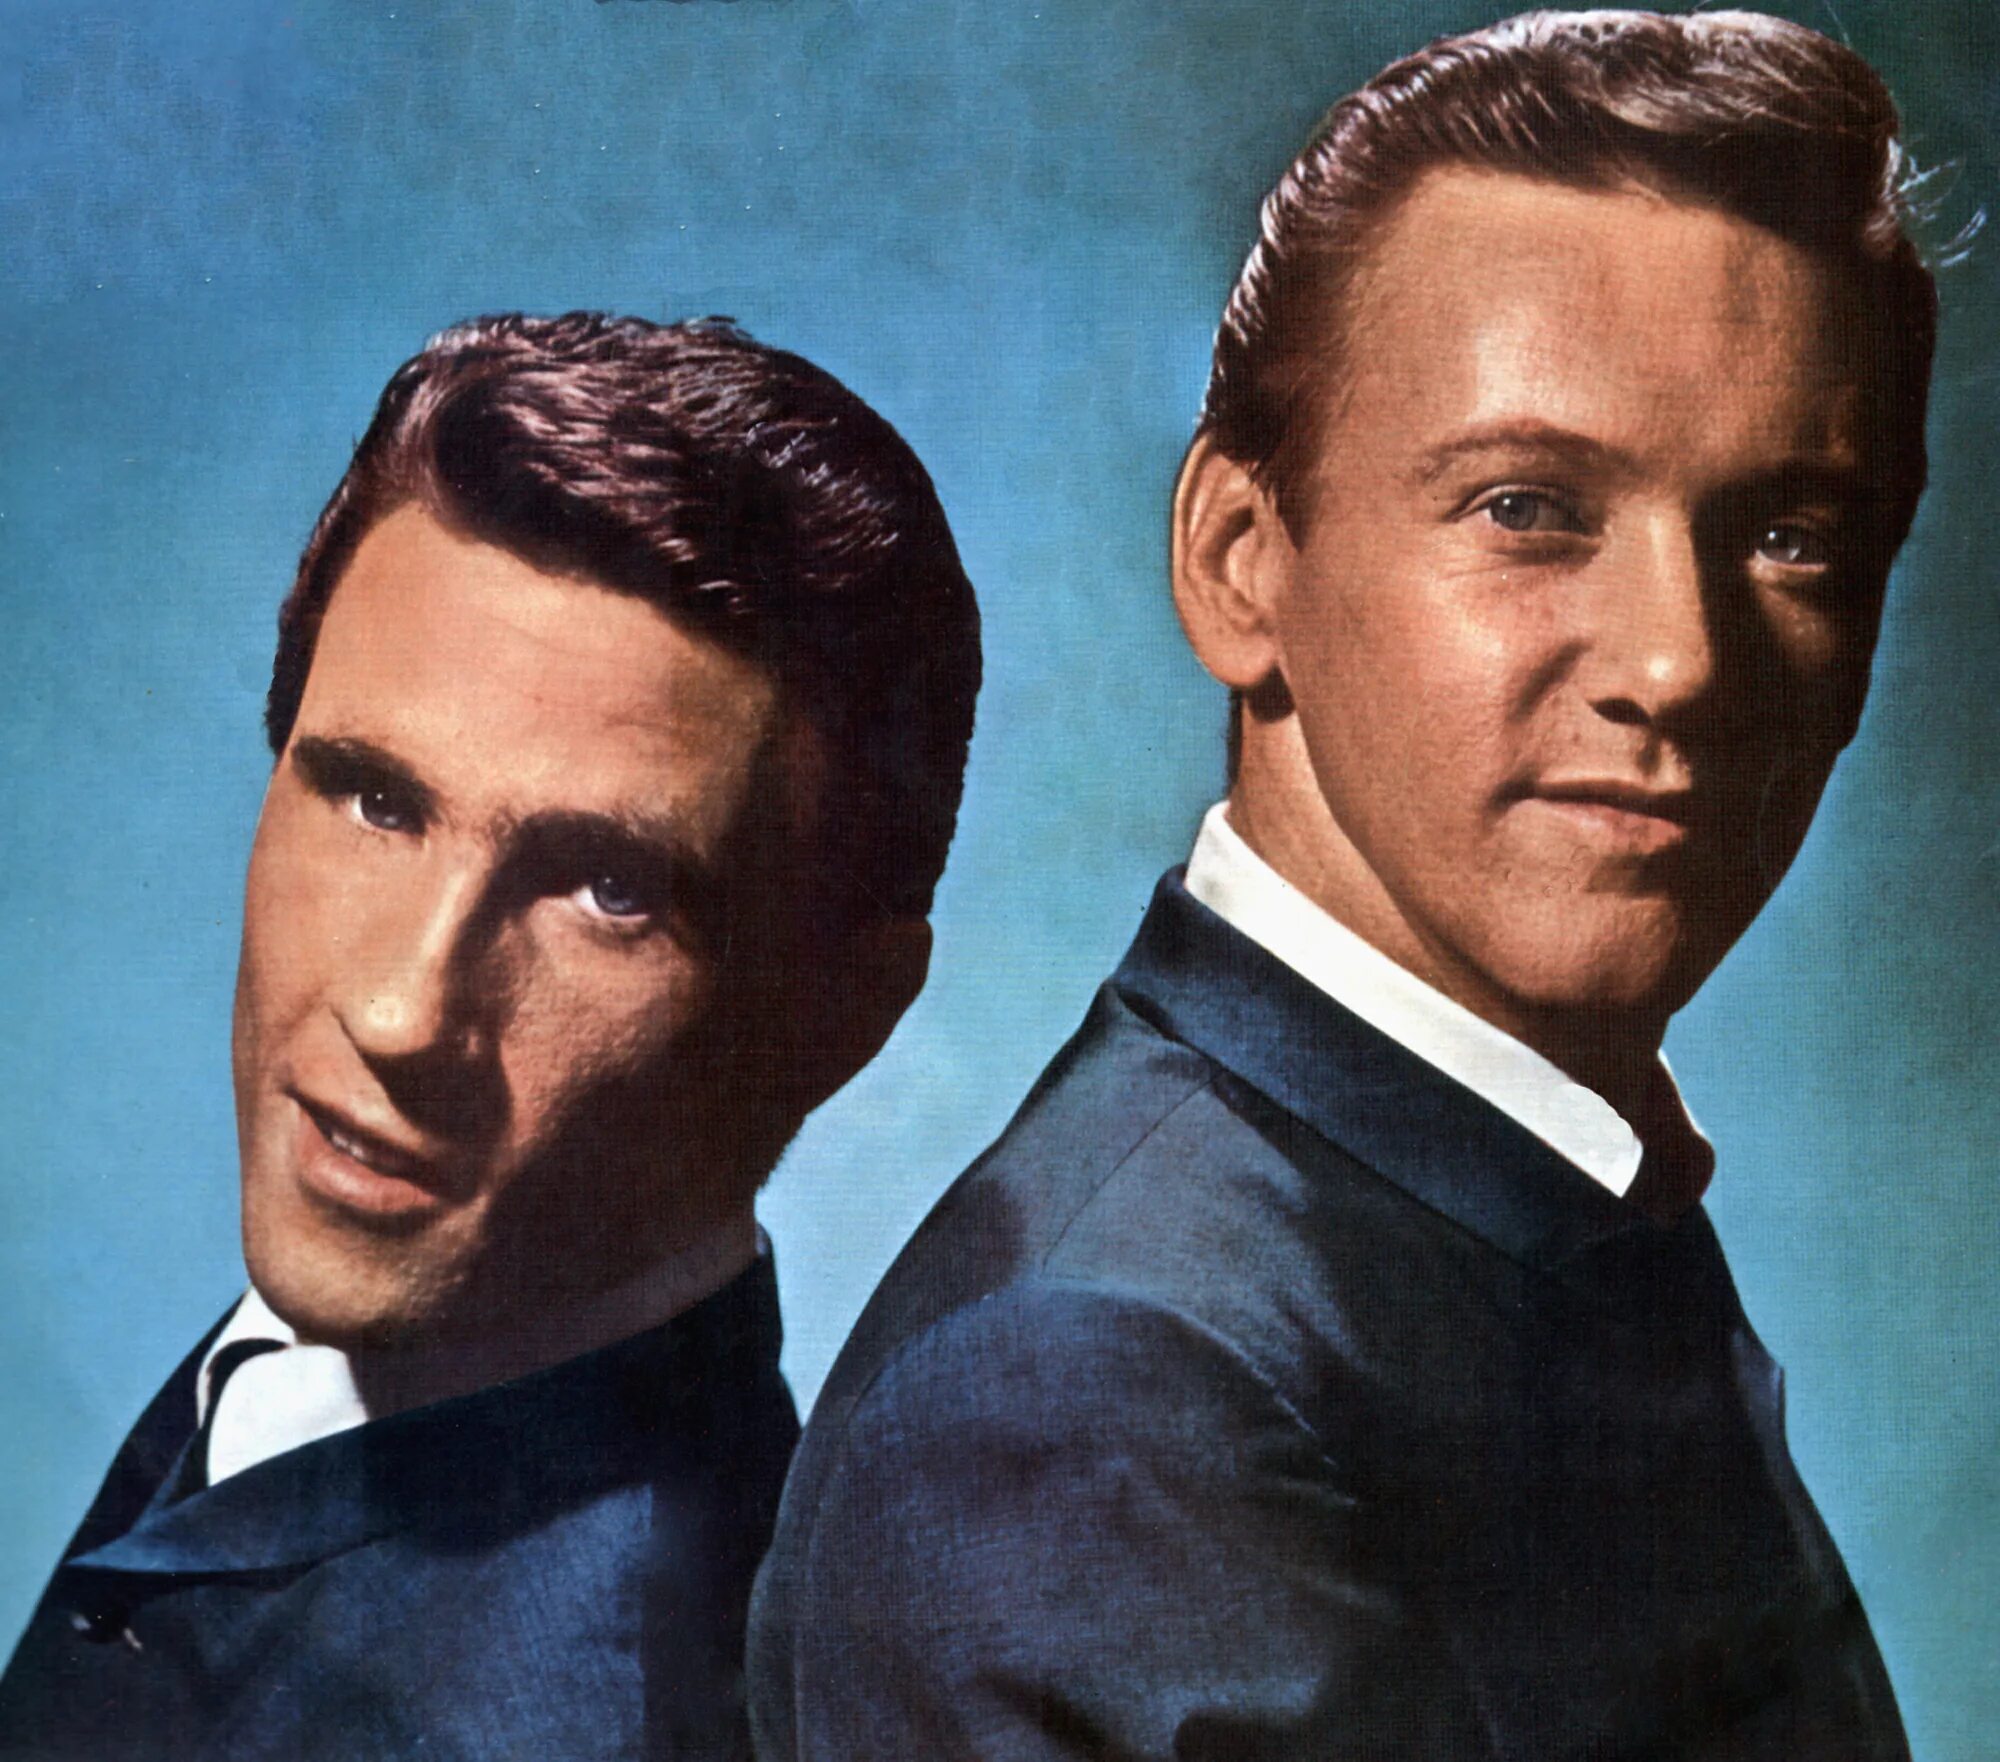 Группа the Righteous brothers. The Righteous brothers - Unchained Melody. Бобби Хэтфилд. Bobby Hatfield 1940.